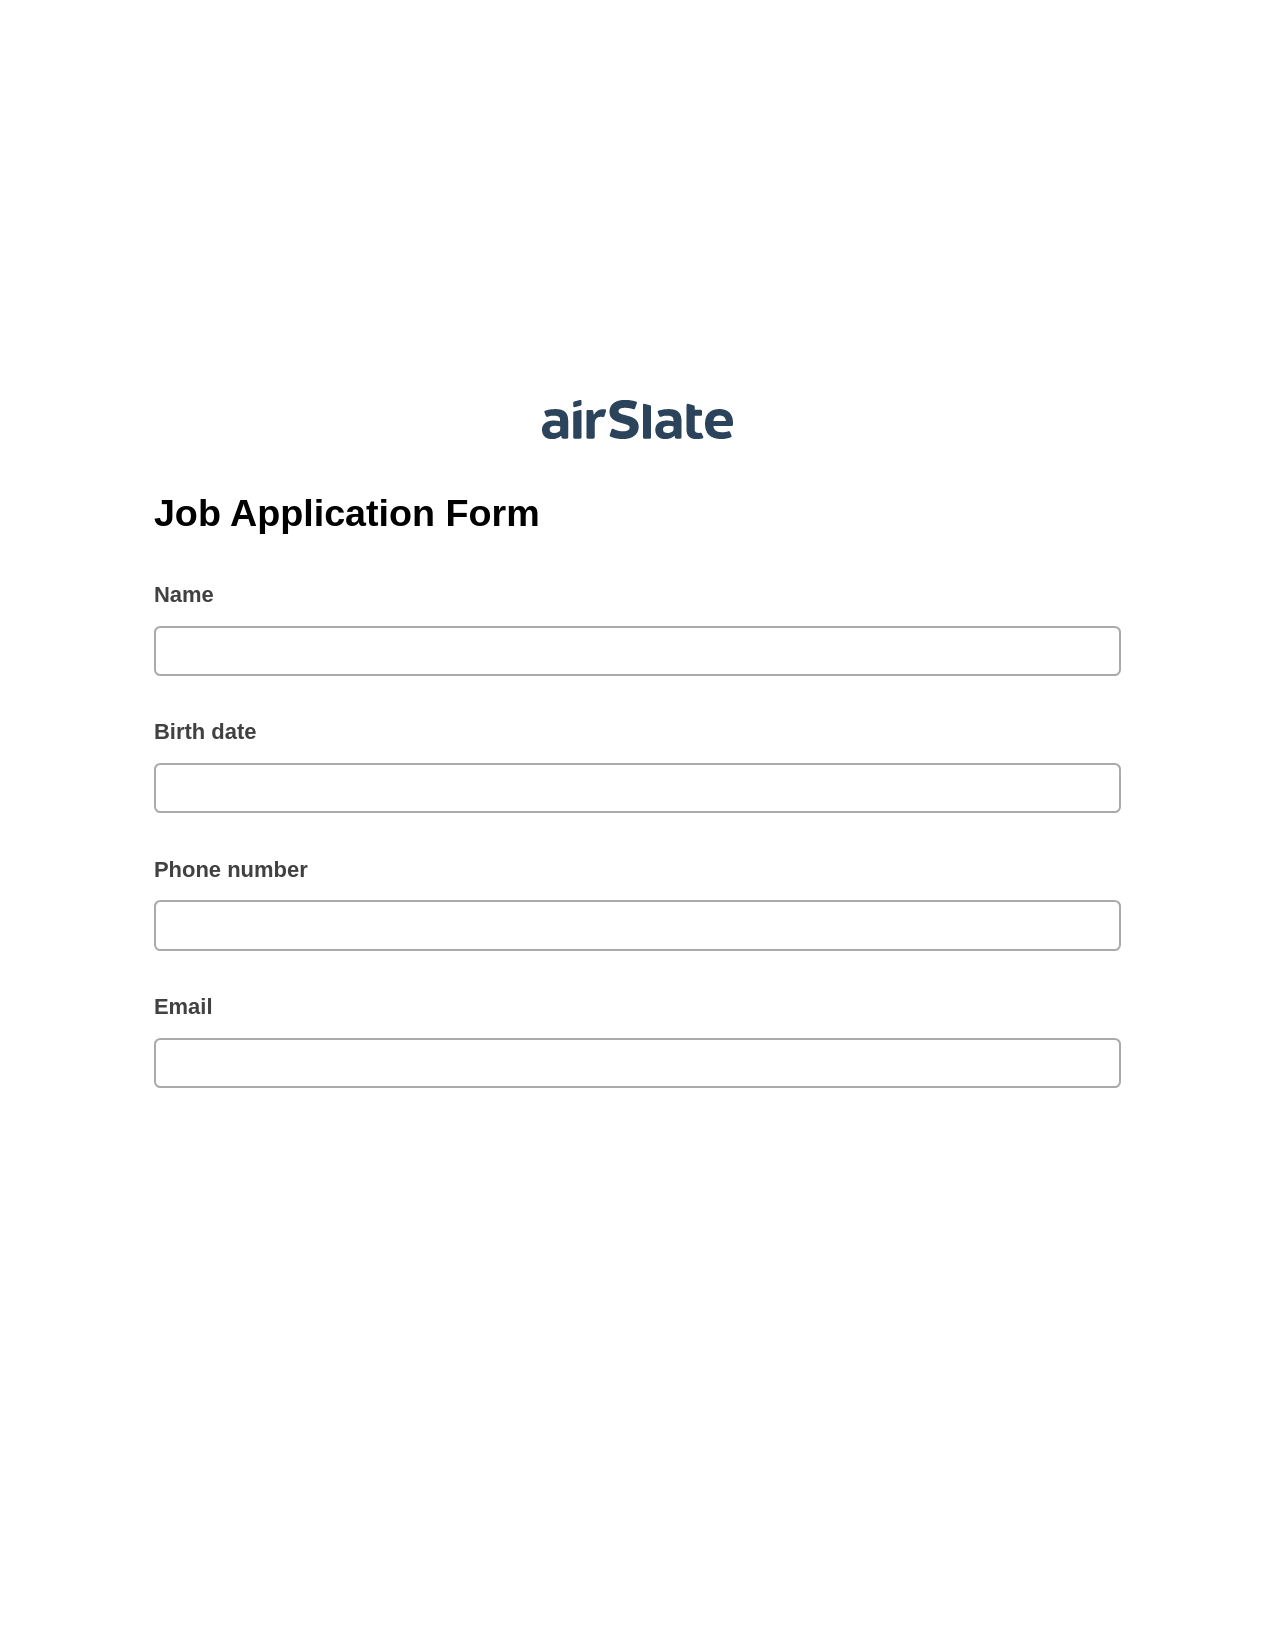 Multirole Job Application Form Pre-fill from CSV File Dropdown Options Bot, Pre-fill with Custom Data Bot, Post-finish Document Bot